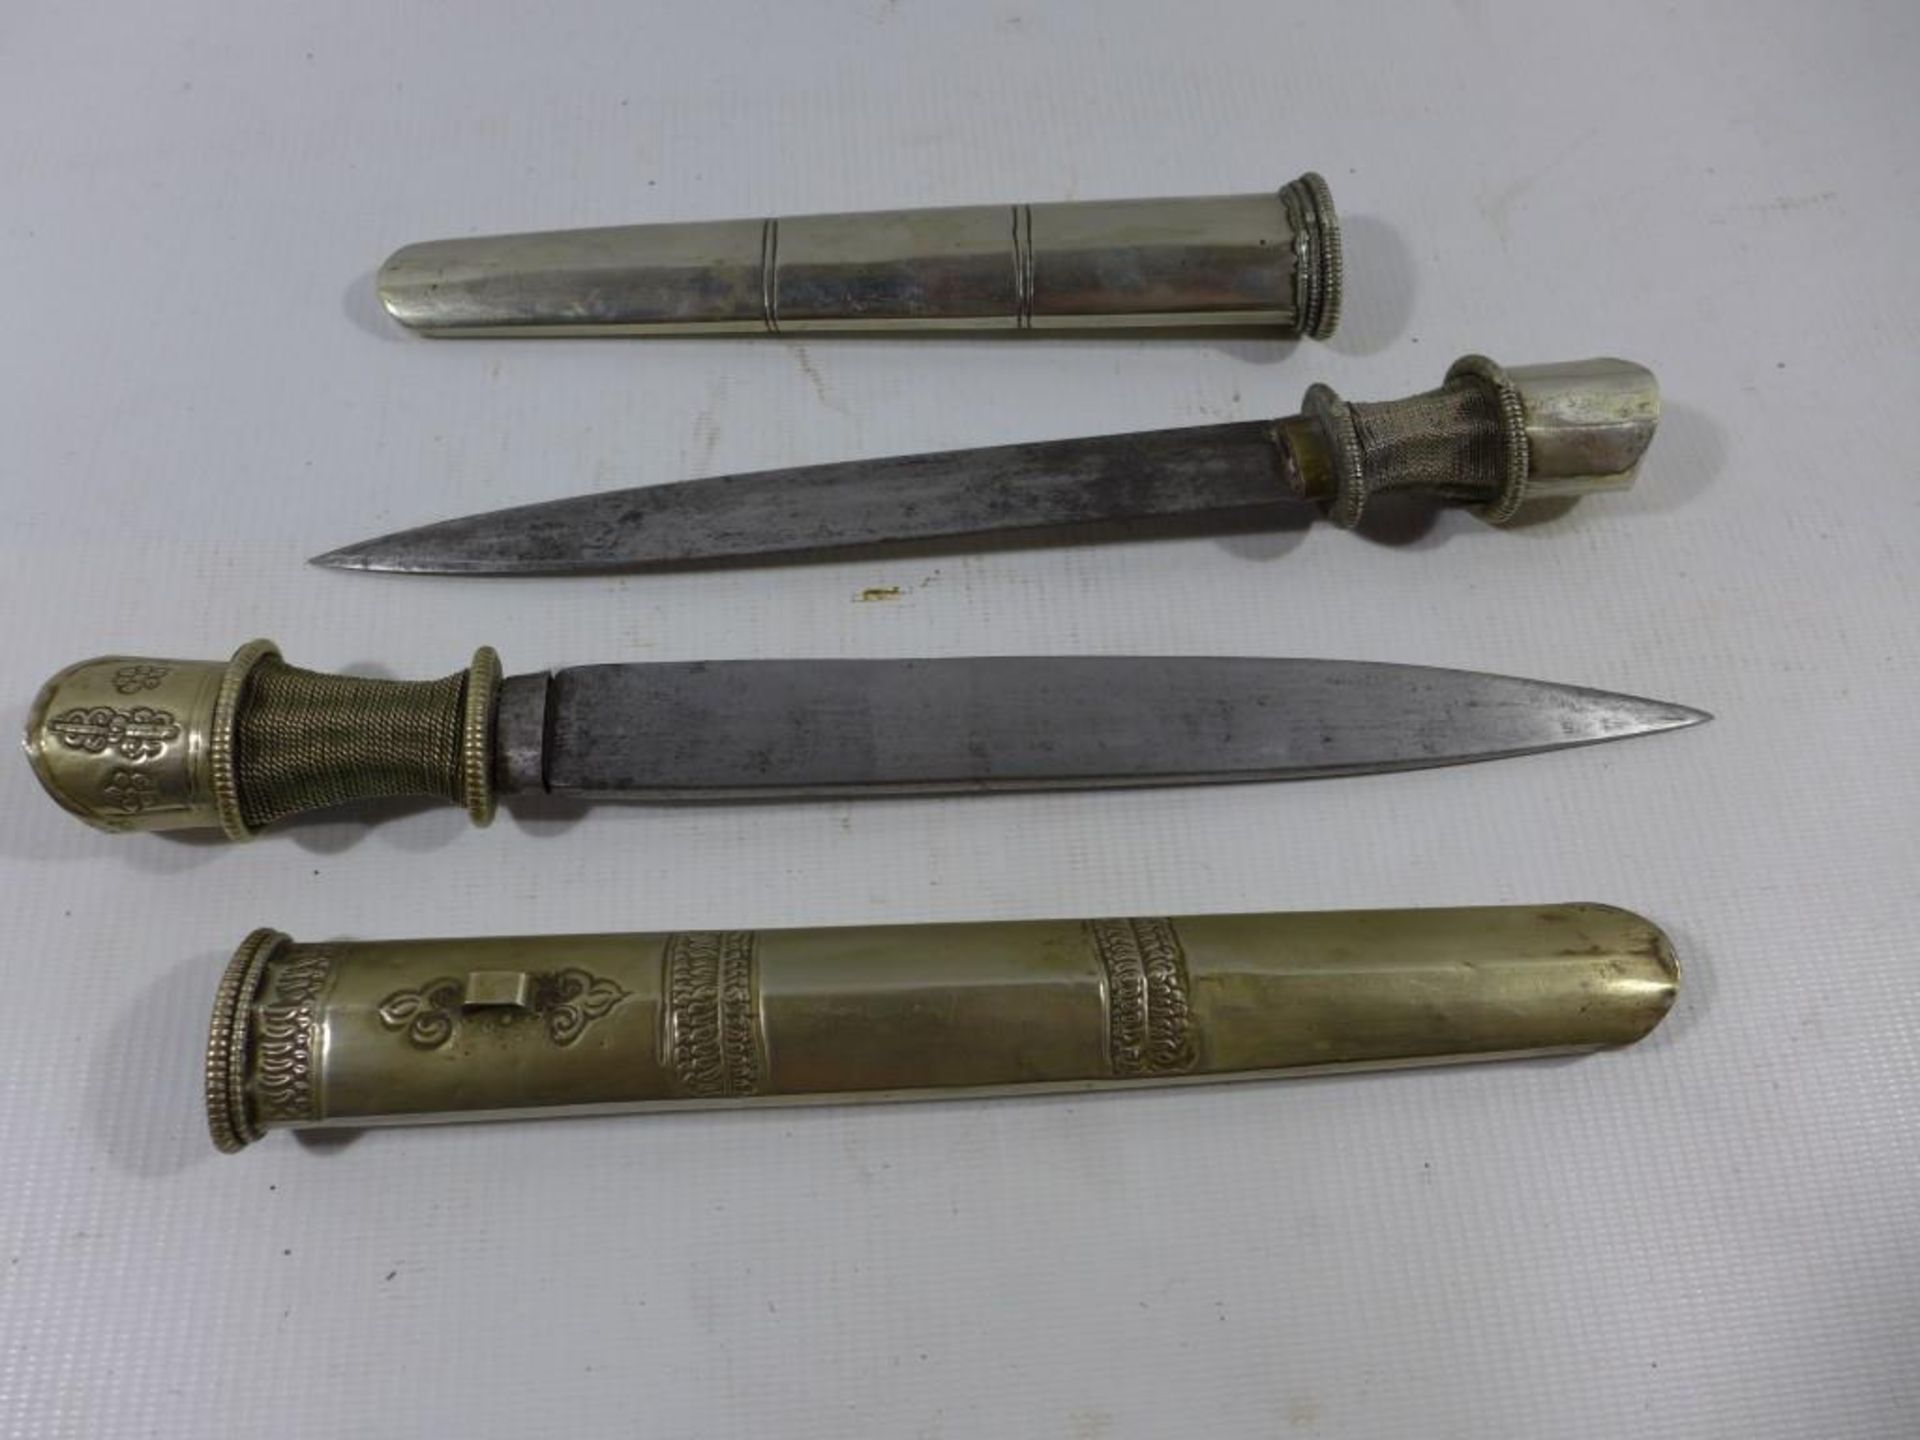 TWO FAR EASTERN DAGGERS AND SCABBARDS, 20CM AND 23CM BLADES